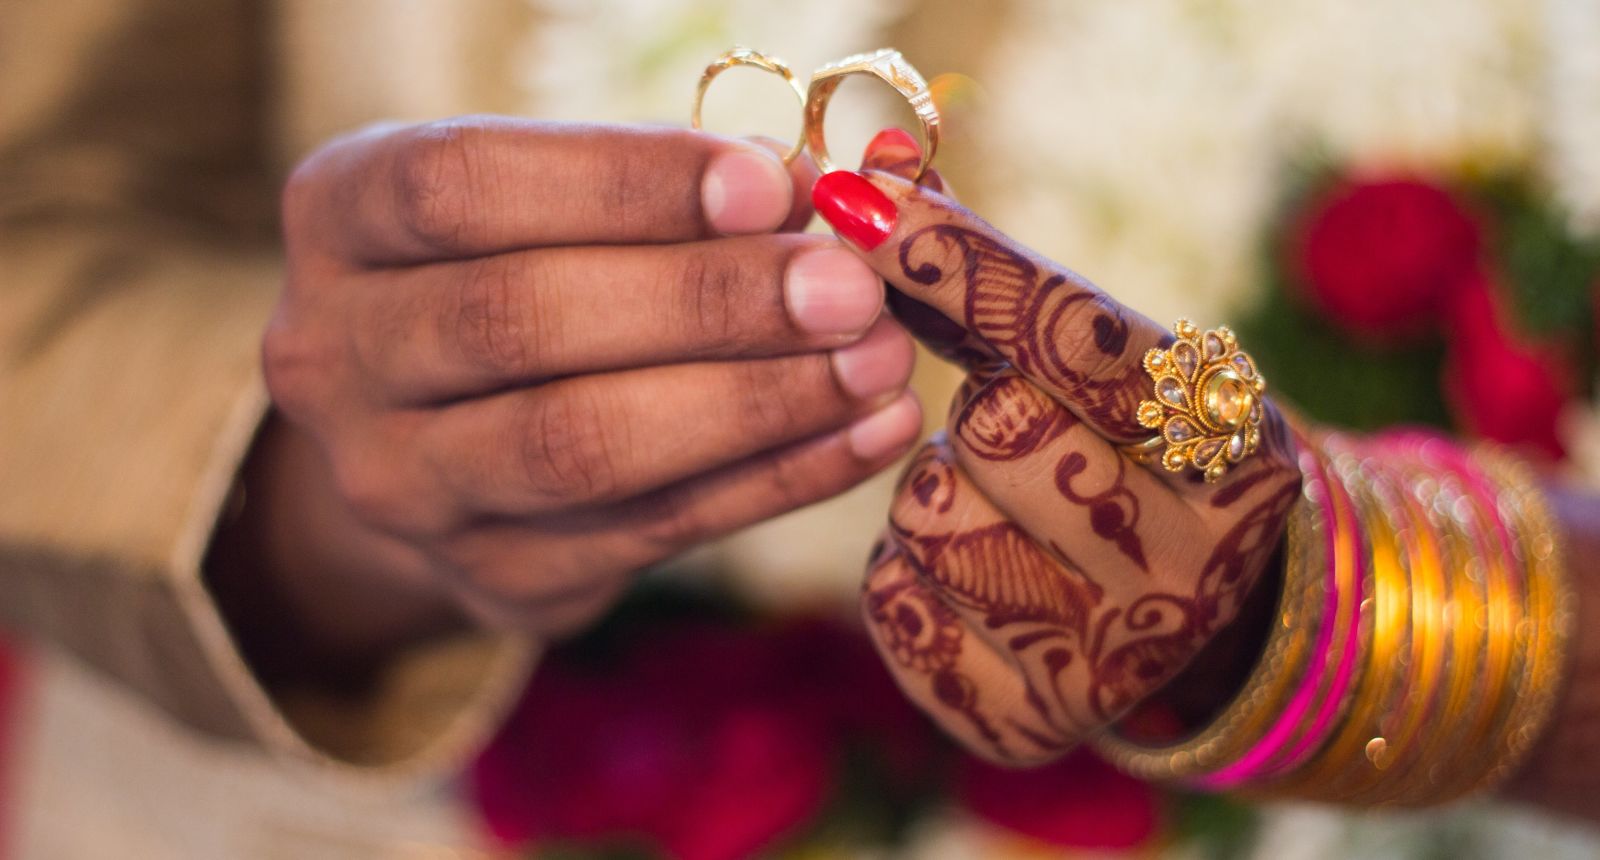 A close-up of a people's hands exchanging wedding rings